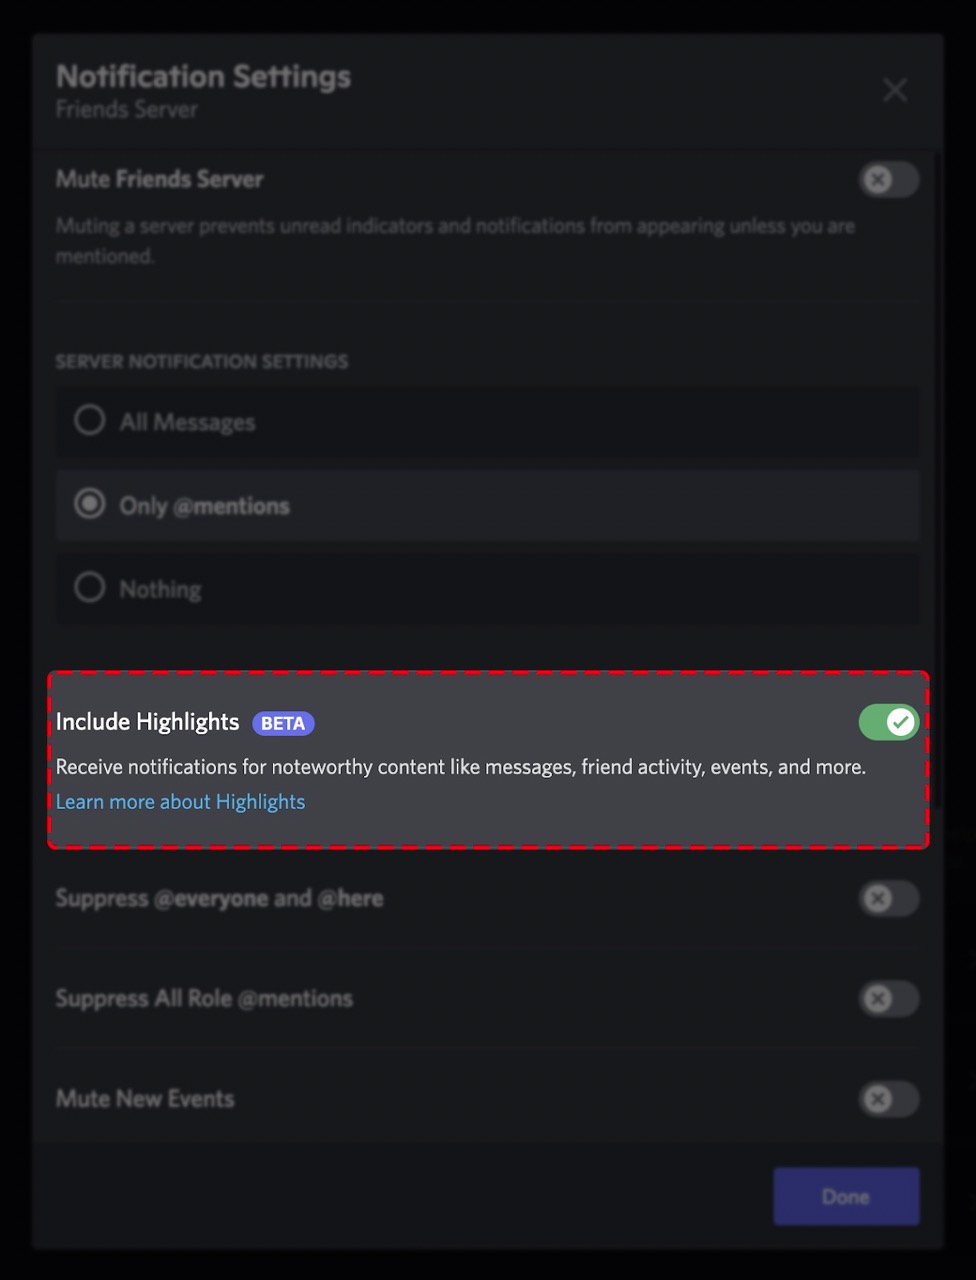 Getting Discord Notifications even after Mute